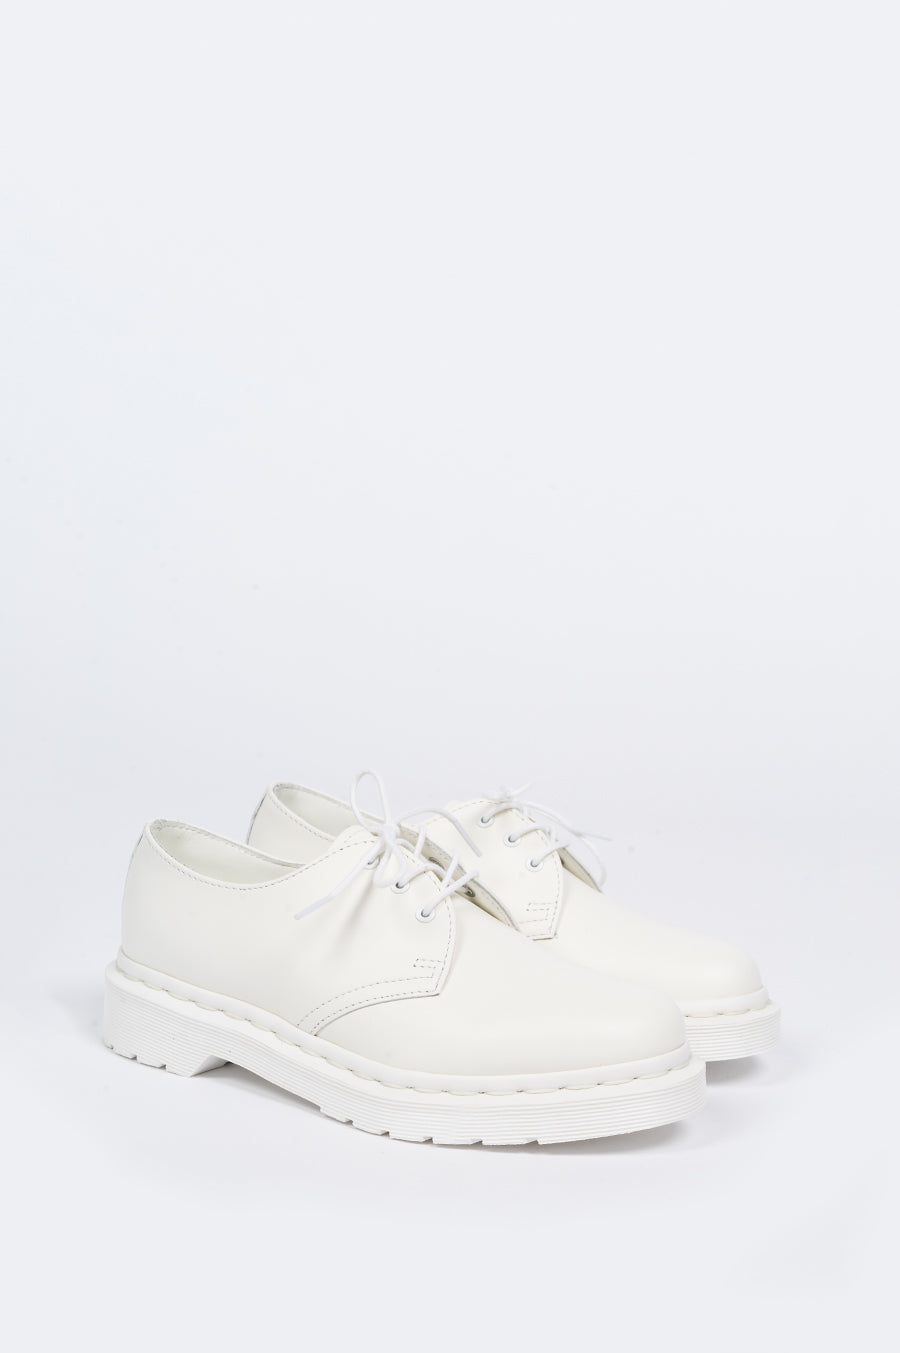 DR MARTENS 1461 MONO WHITE SMOOTH - BLENDS